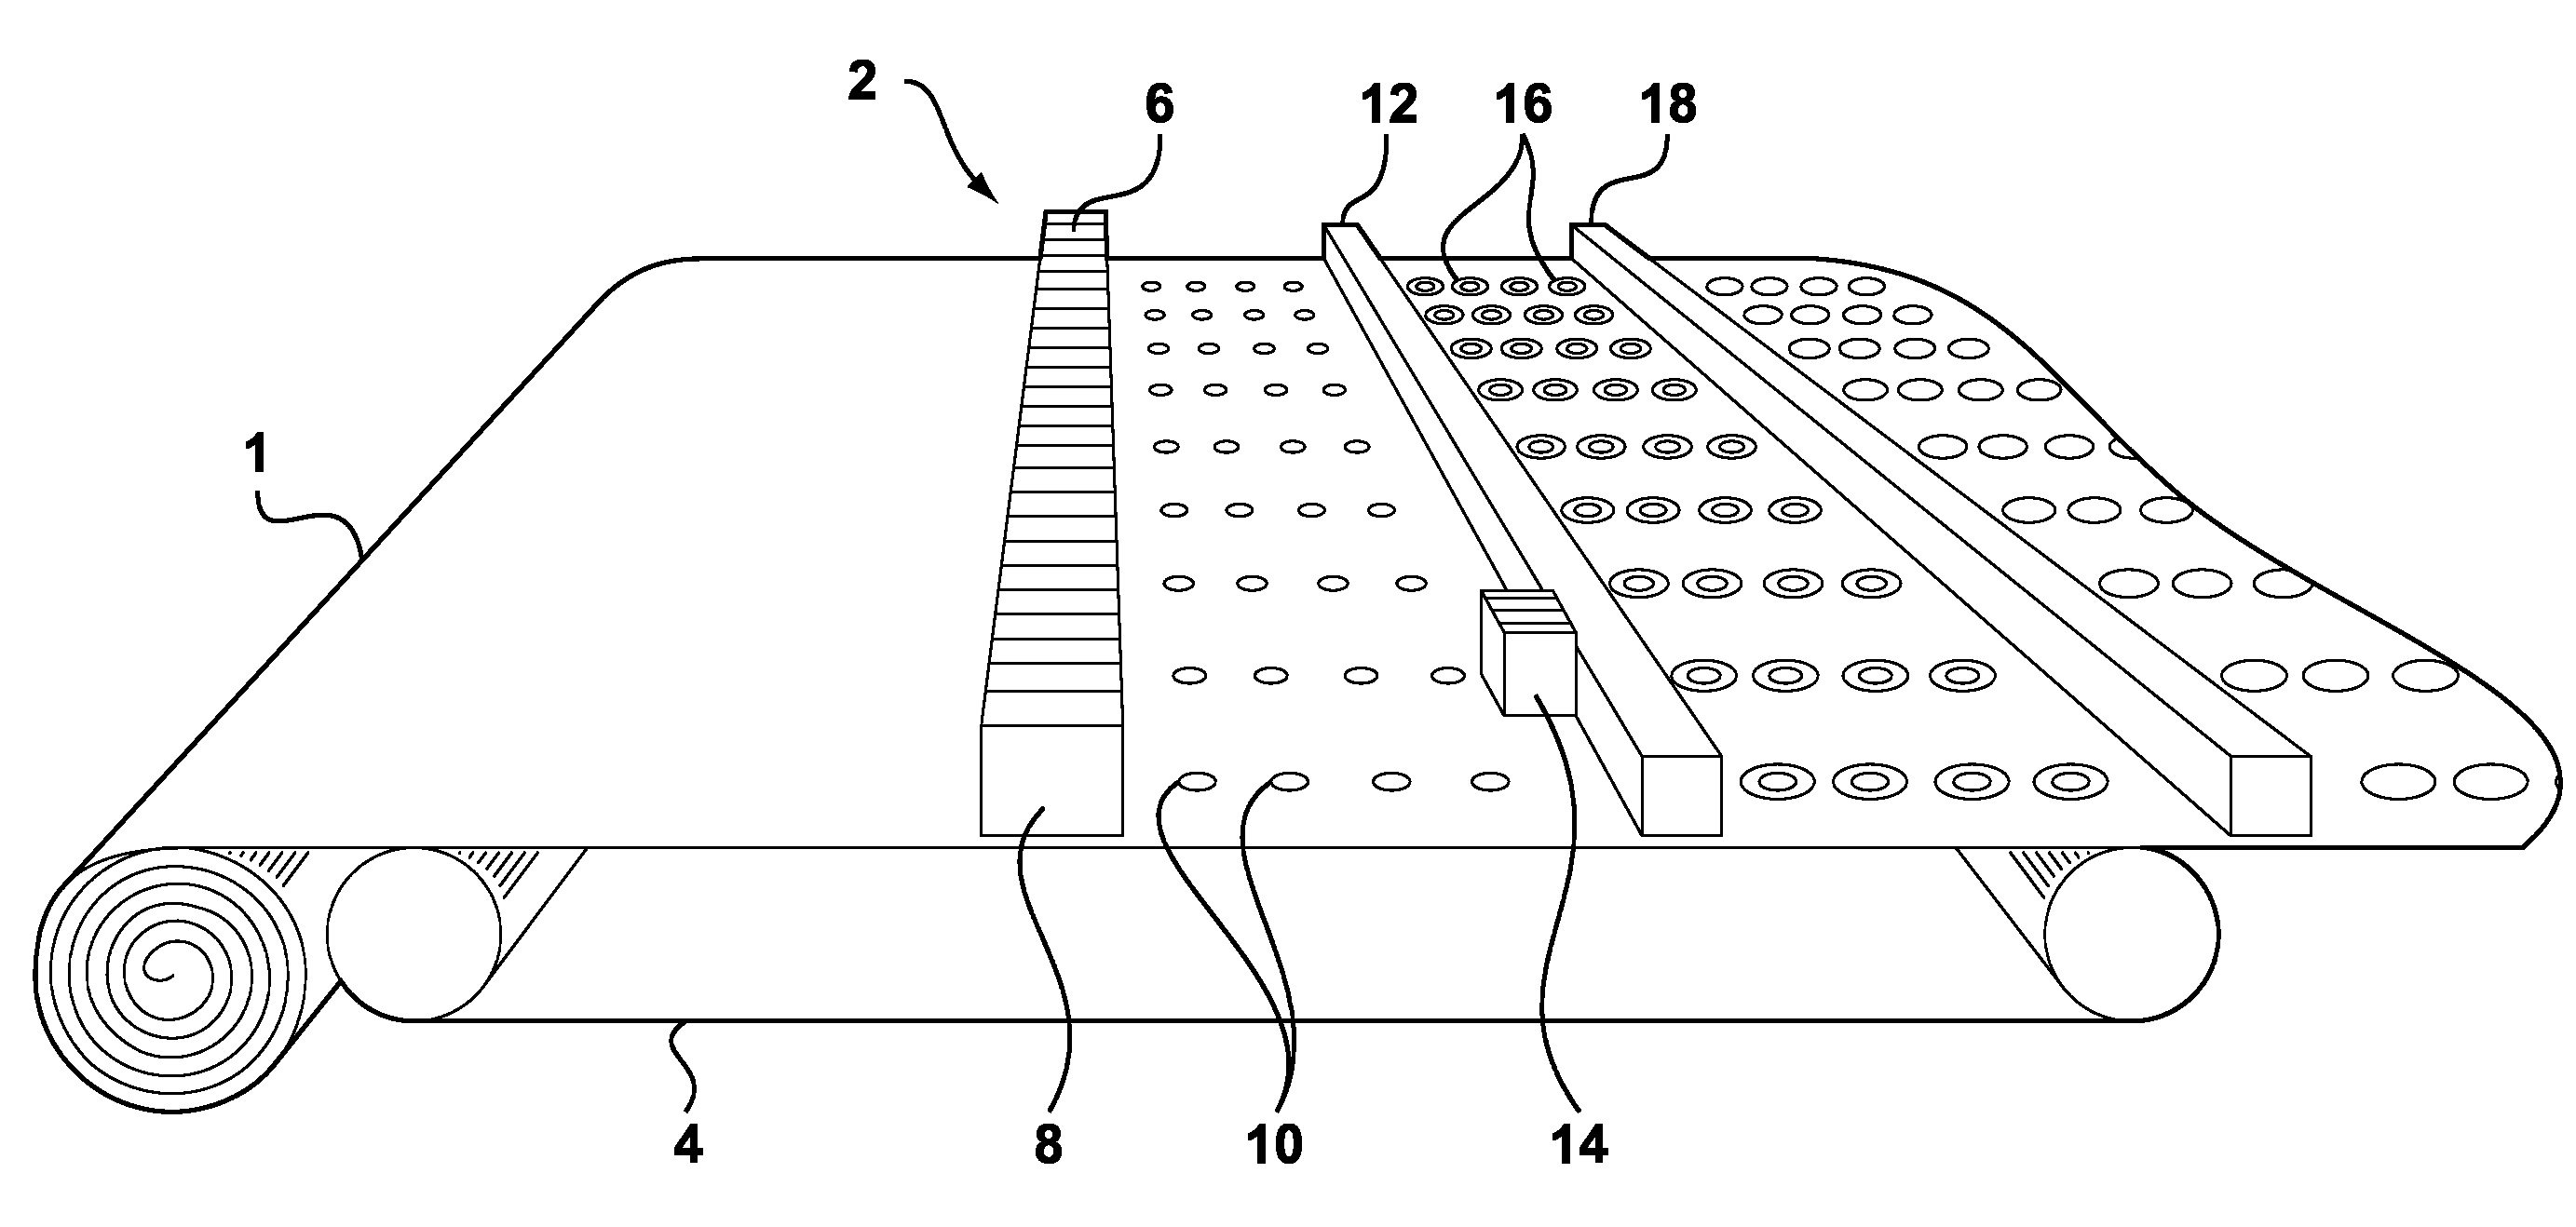 Method of depositing materials on a textile substrate